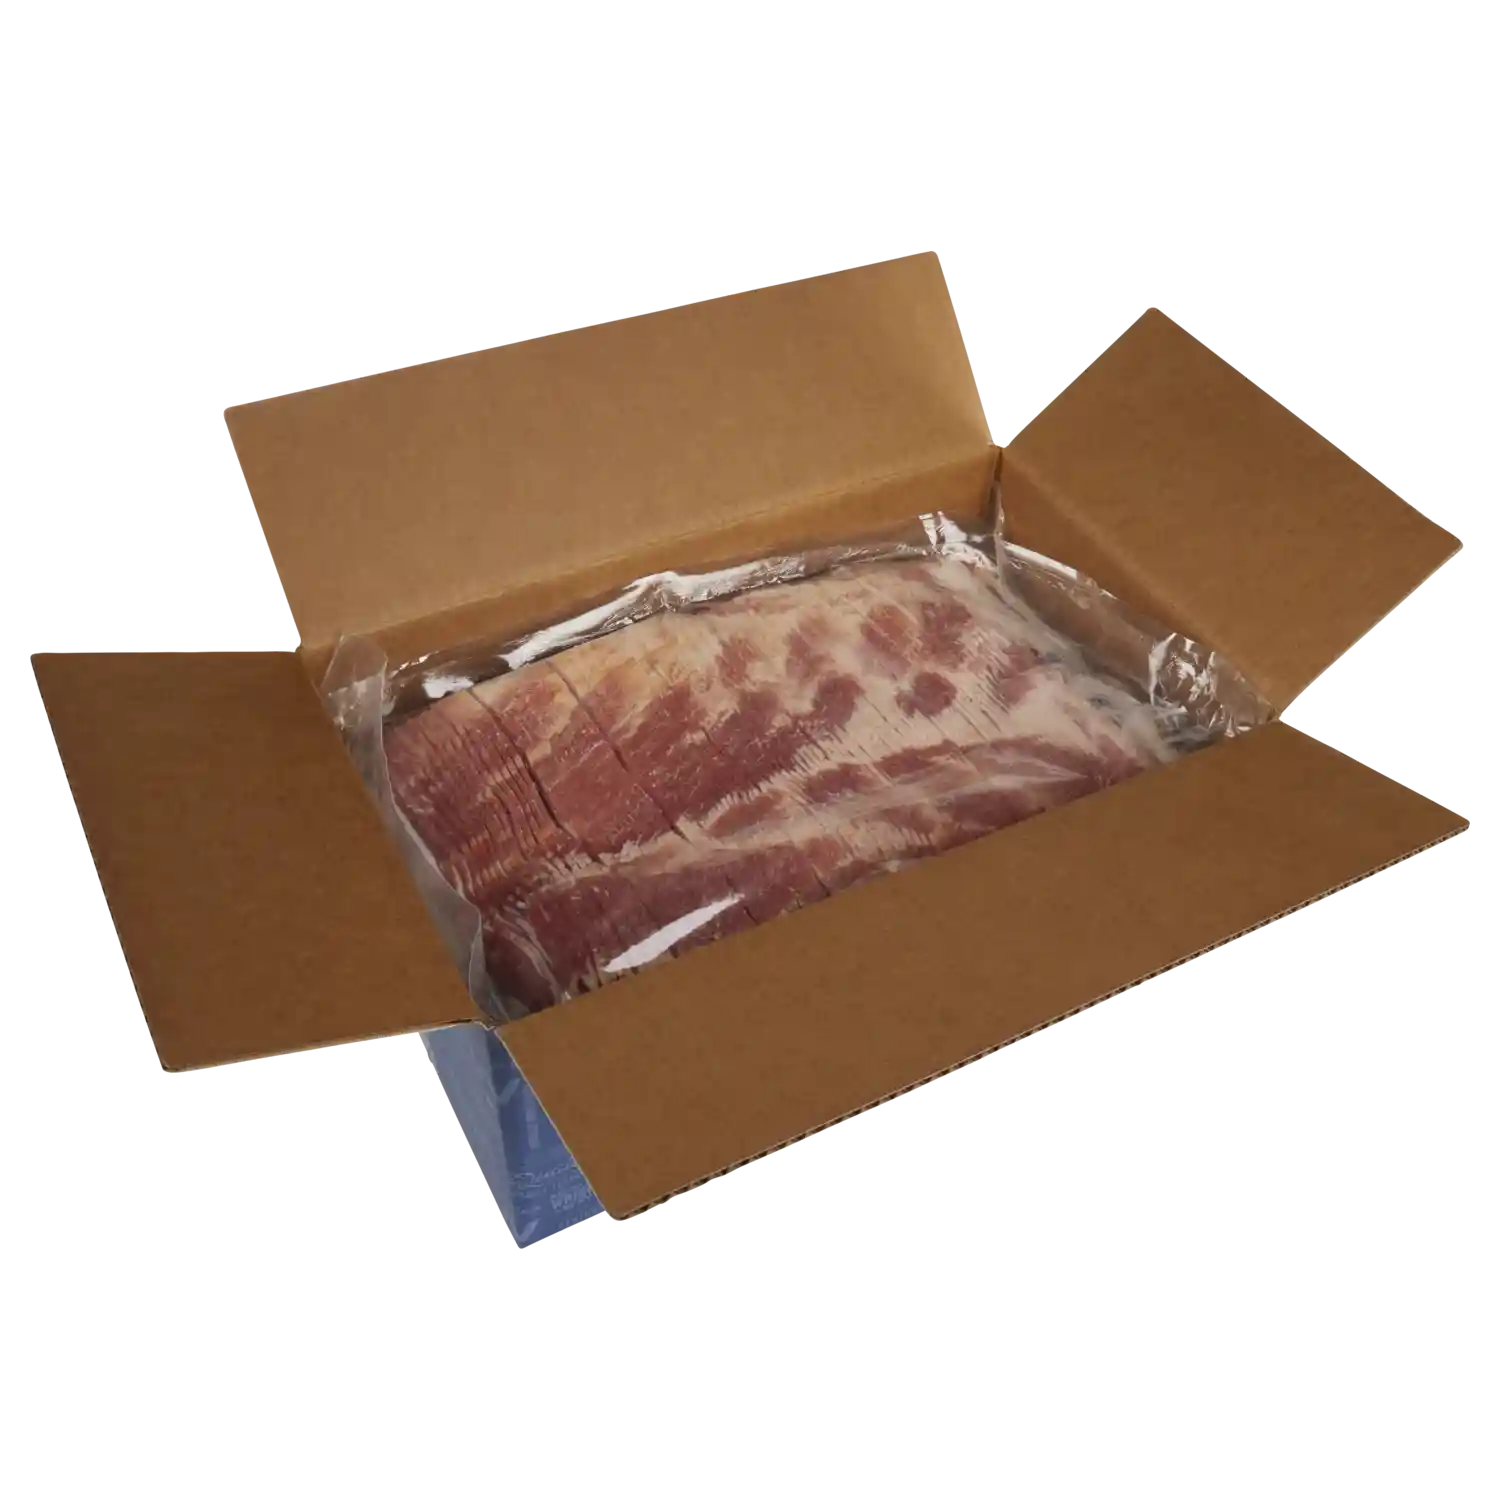 Wright® Brand Naturally Hickory Smoked Thick Sliced Bacon, Bulk, 30 Lbs, 10-14 Slices per Pound, Gas Flushed_image_41